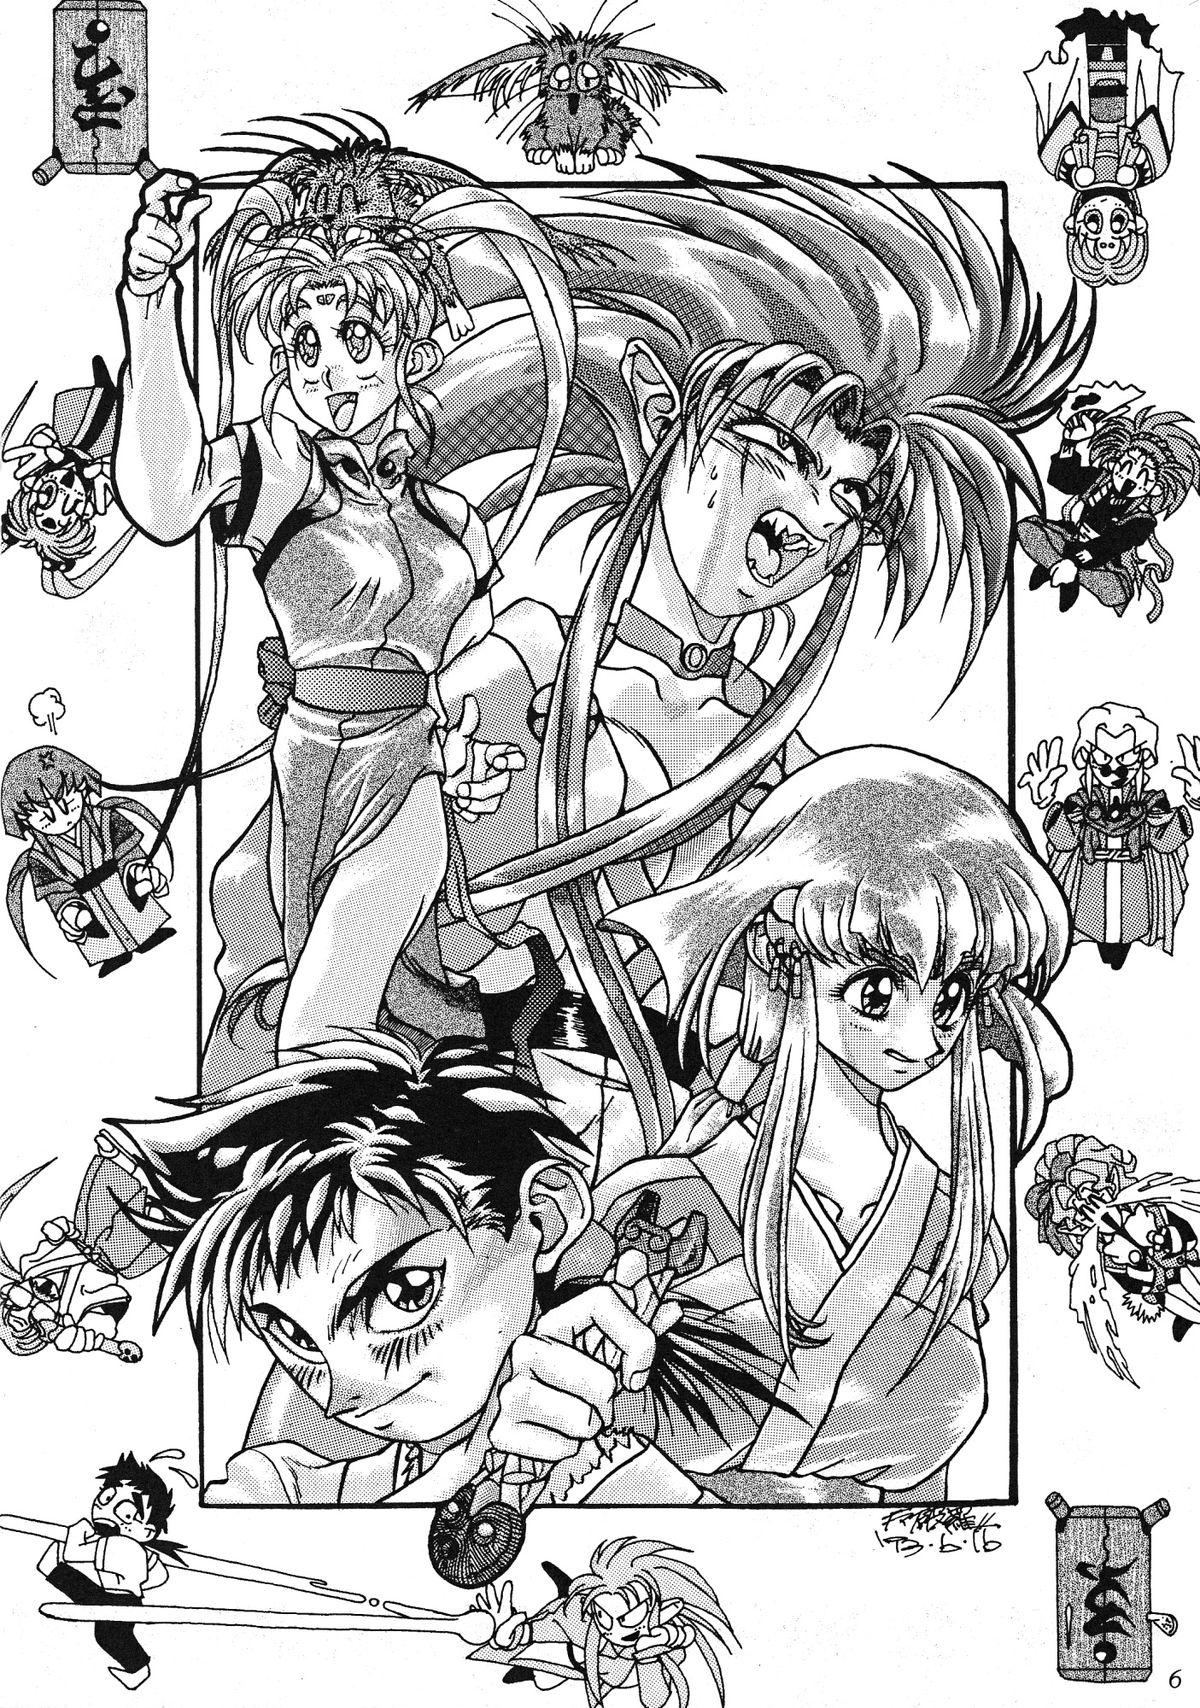 Home Milky Syndrome EX 2 - Sailor moon Tenchi muyo Pretty sammy Ghost sweeper mikami Ng knight lamune and 40 Sub - Page 8